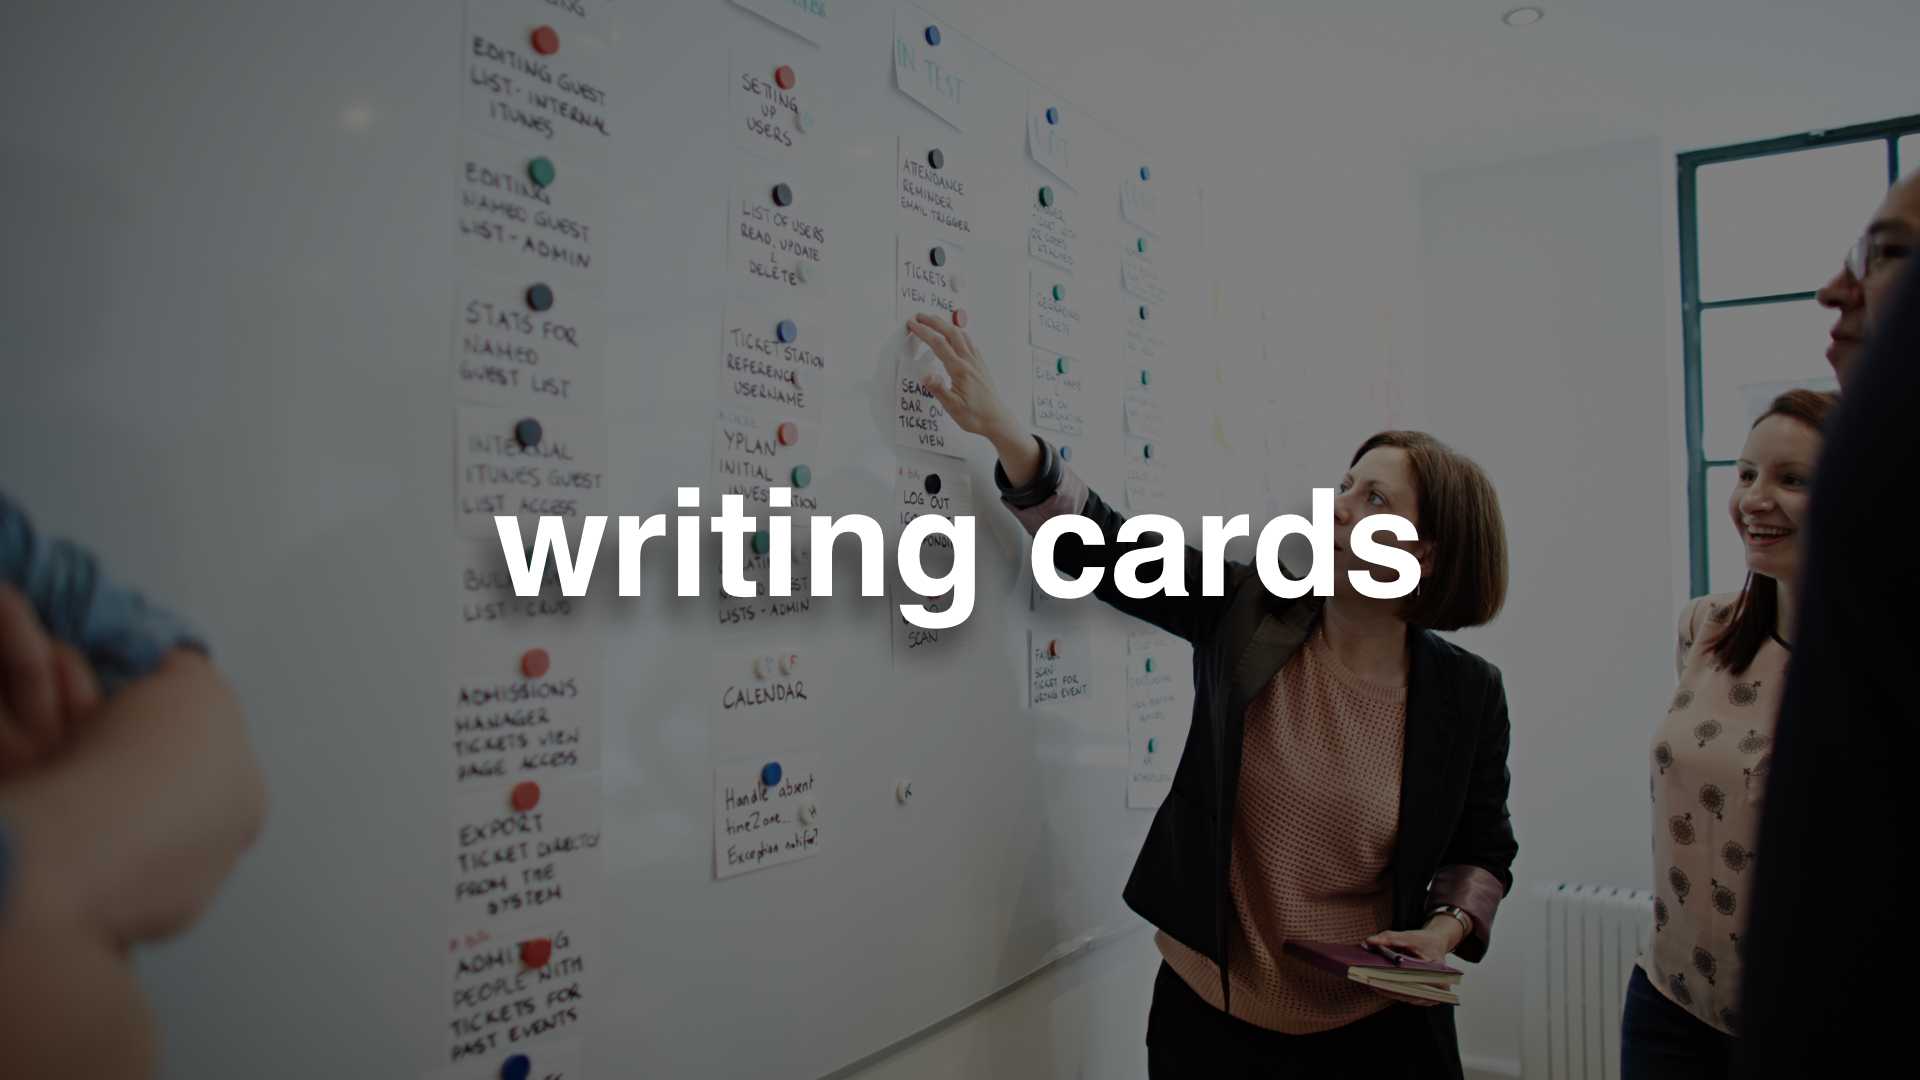 A photo of some people standing in front of an agile wall with index cards on it - text: writing cards